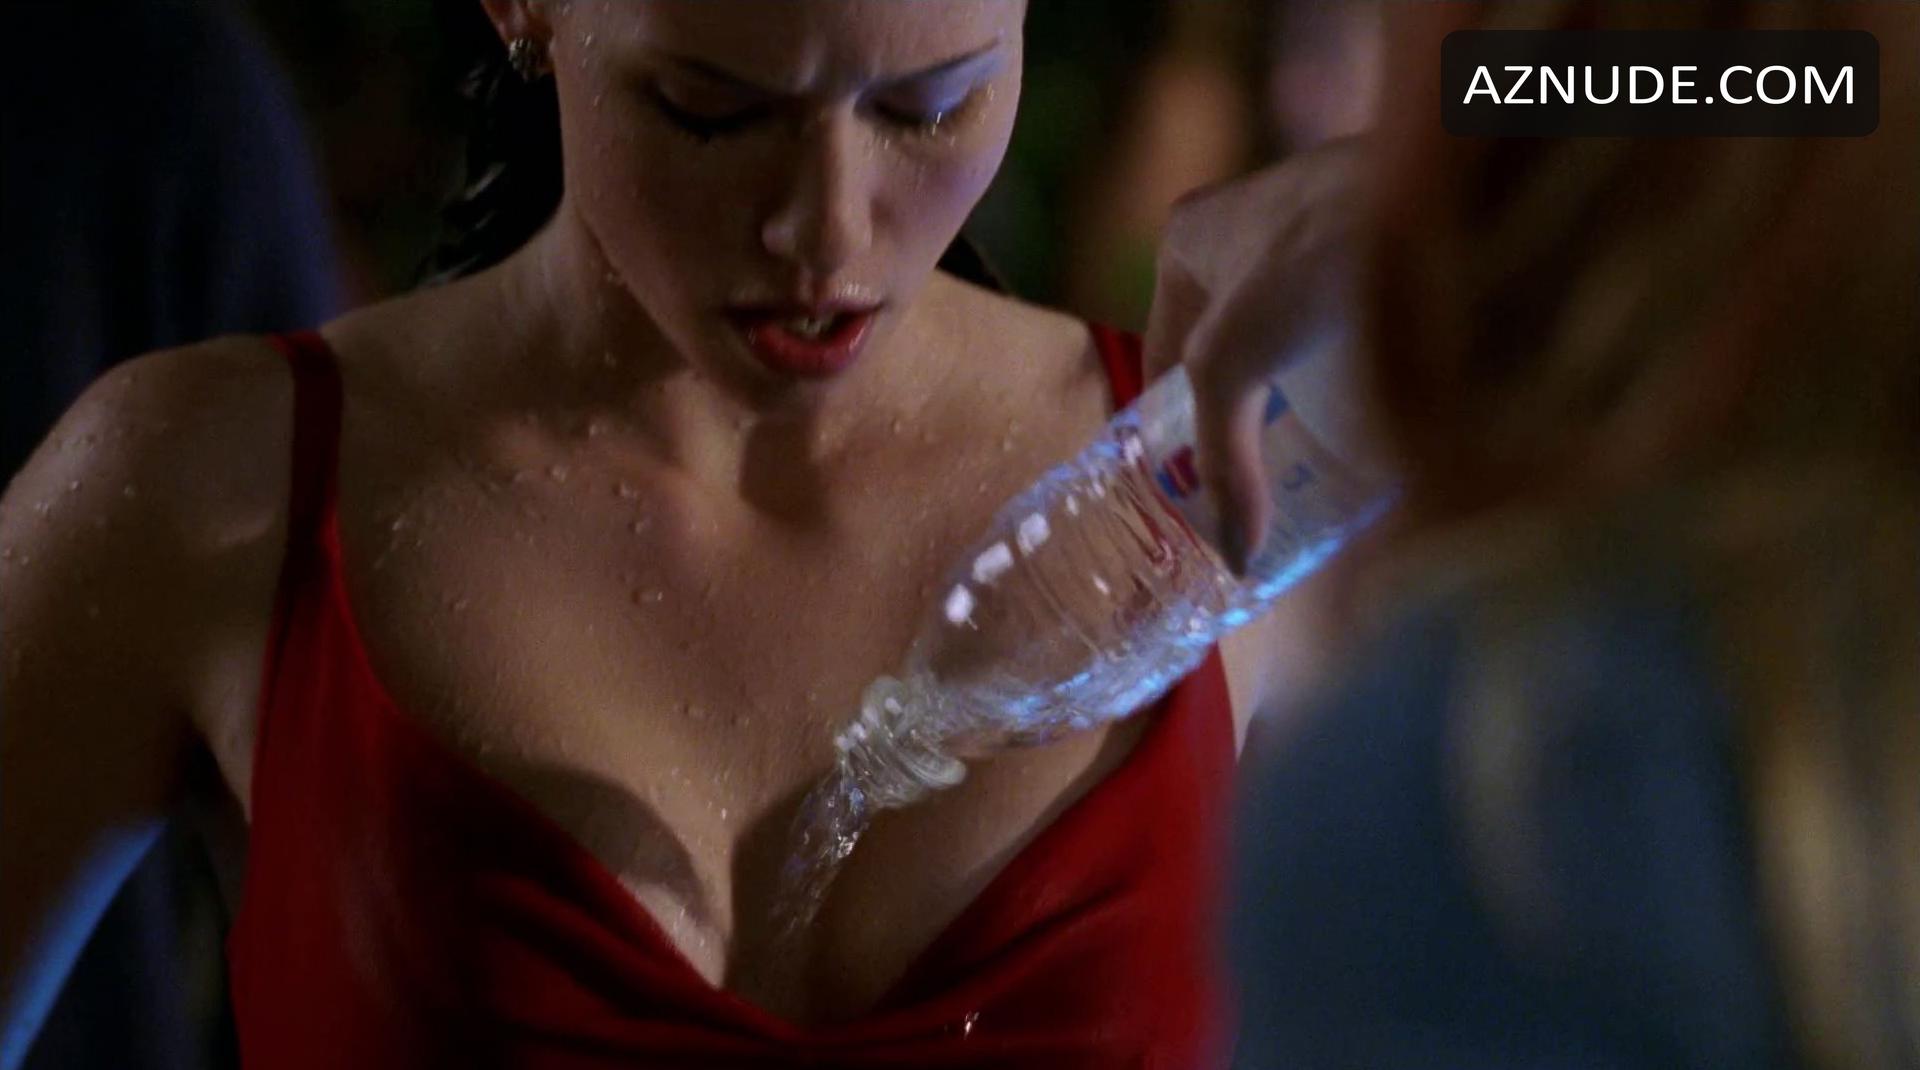 Tits Chyler Leigh Nude Images